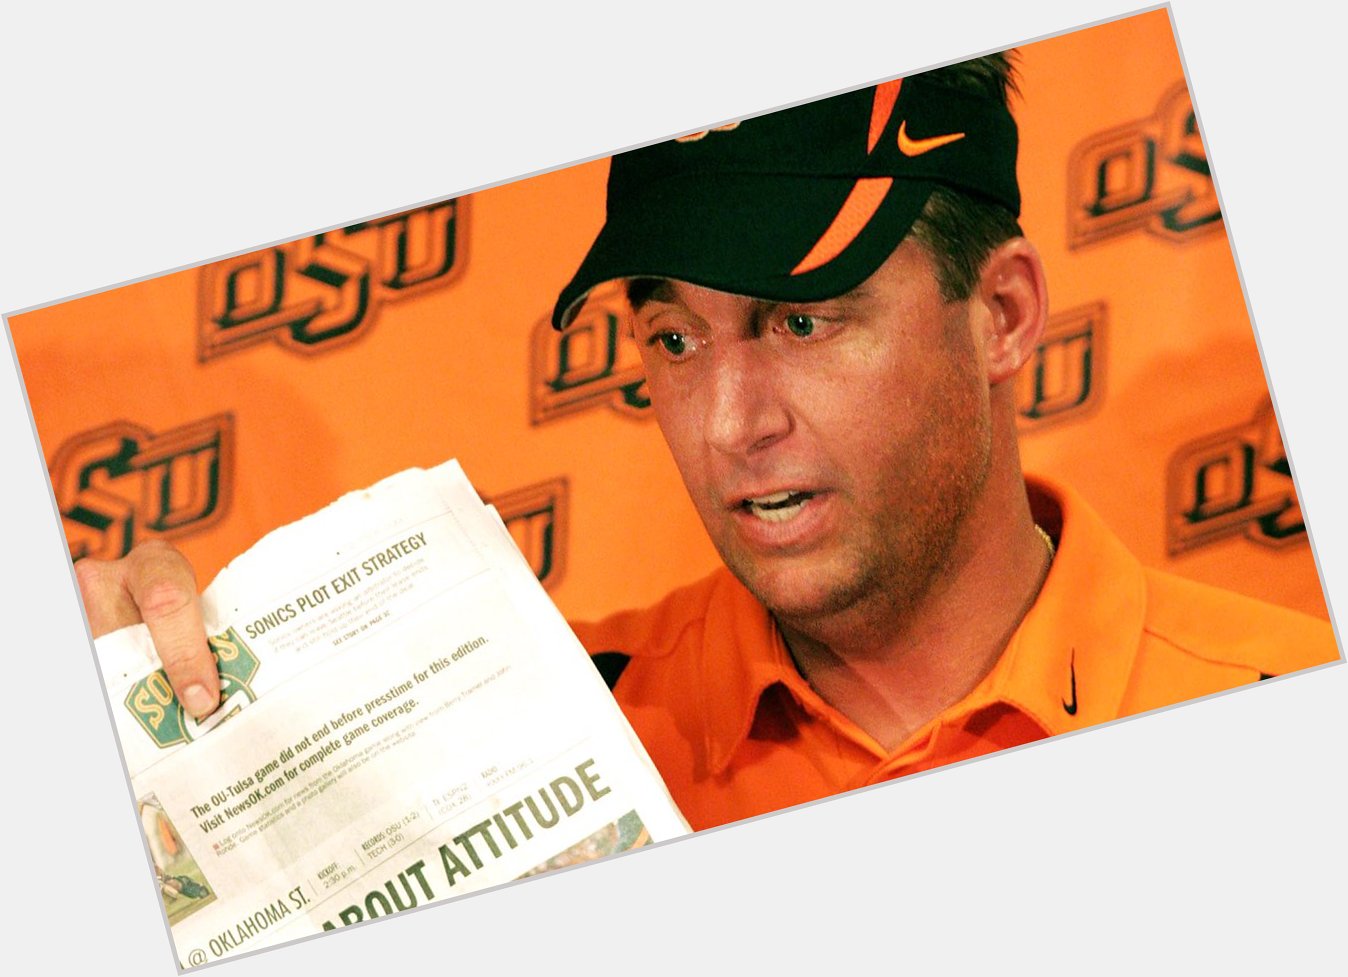 Happy 51st Birthday Mike Gundy. It seems like only yesterday you were 40 